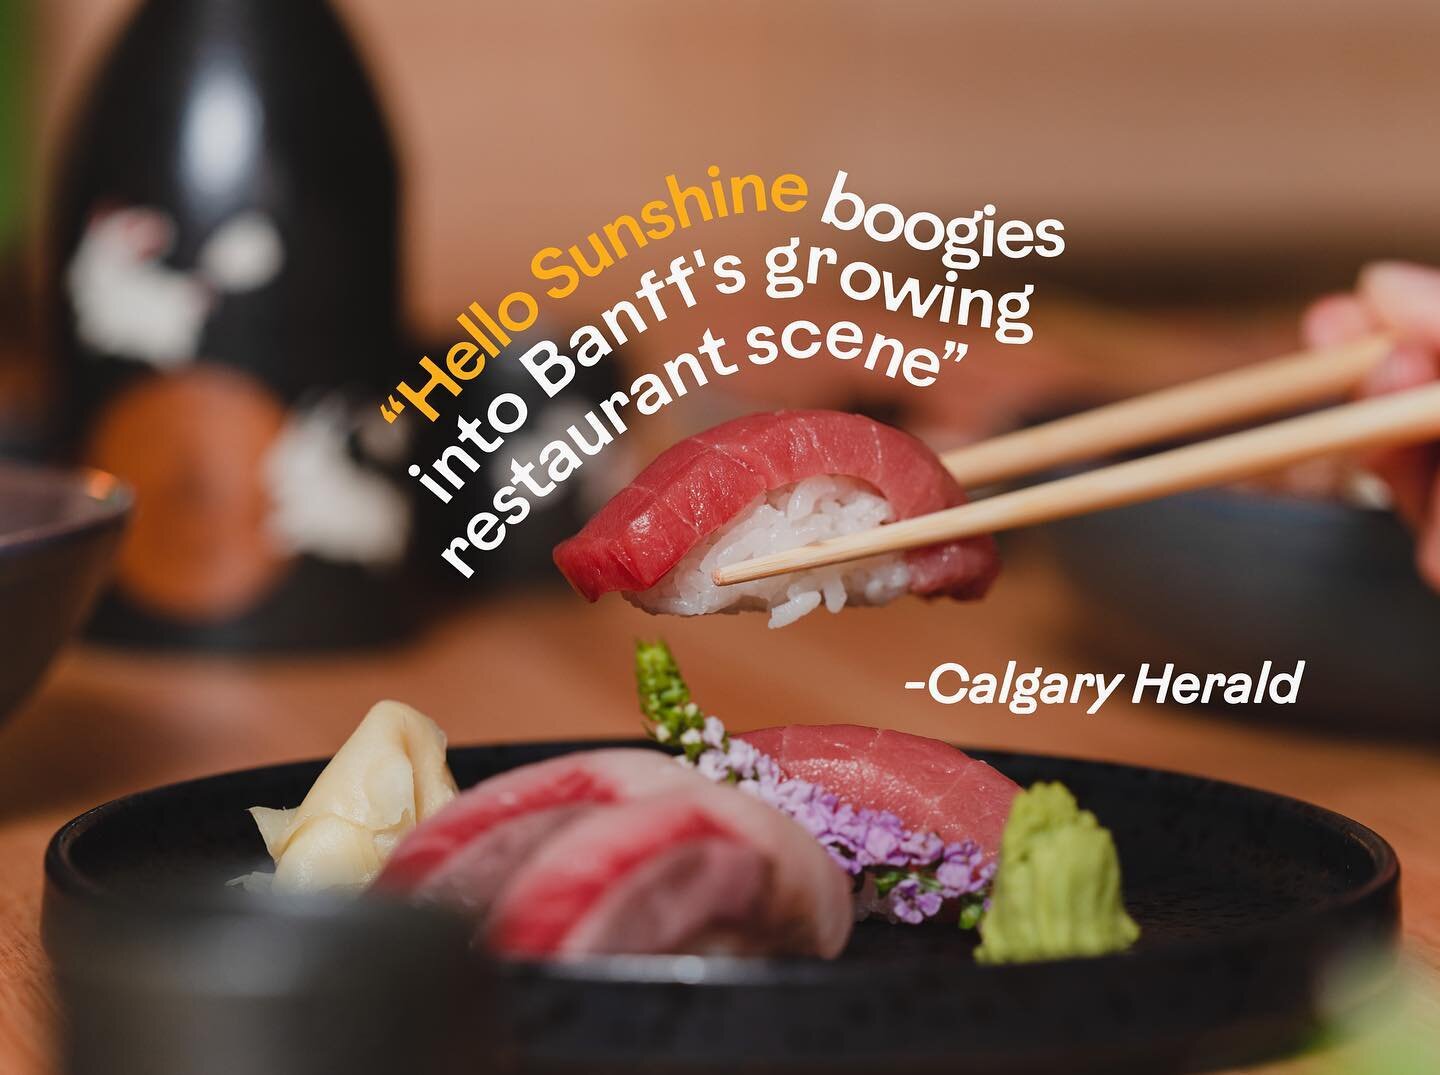 Thank you to @elizabooth and the @calgaryherald for such a wonderful review of our new space and menu! 🌞 Come and experience our hybrid izakaya menu, Japanese inspired cocktails, and groovy karaoke rooms for yourself! 🍣🎤

Hit the link in bio to re